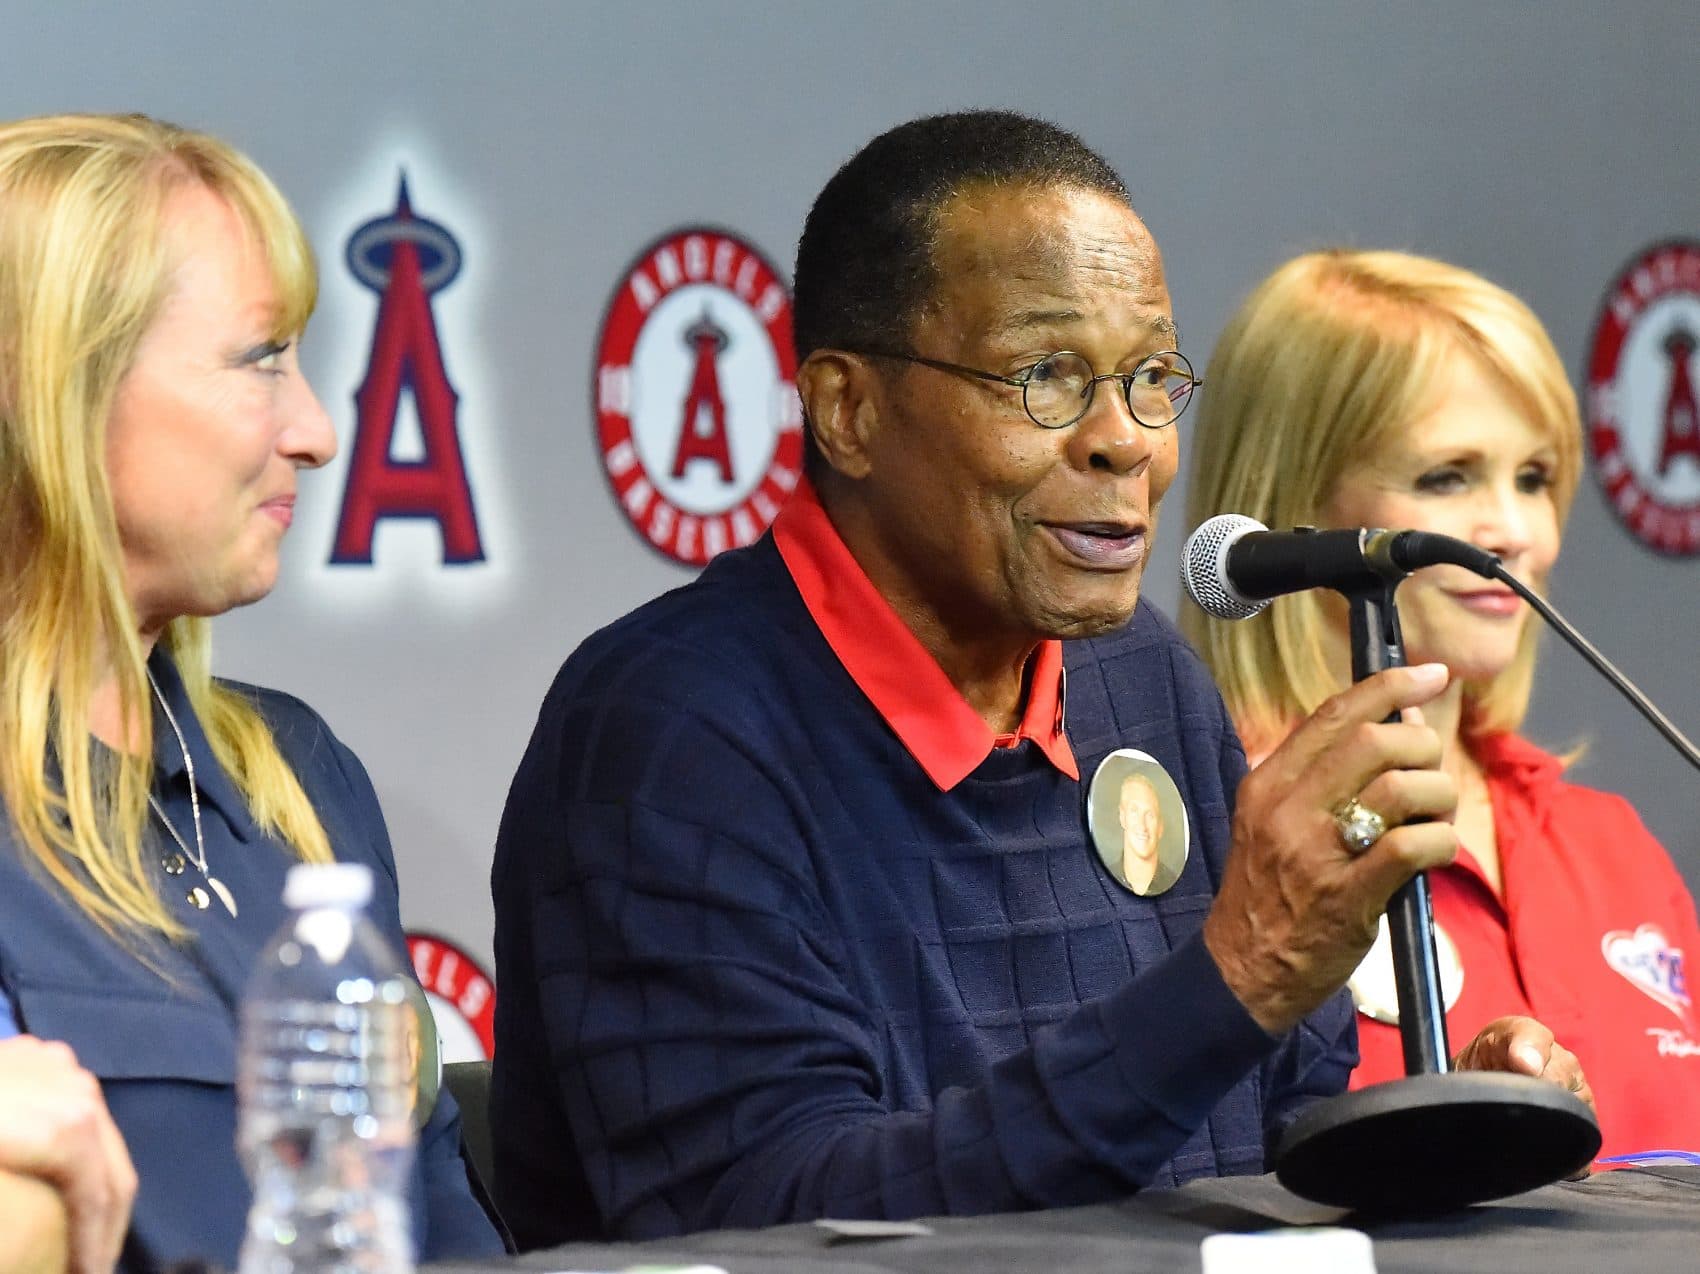 Baseball Great Rod Carew Hopes to Raise Awareness After Heart Transplant  From Tragic NFLer